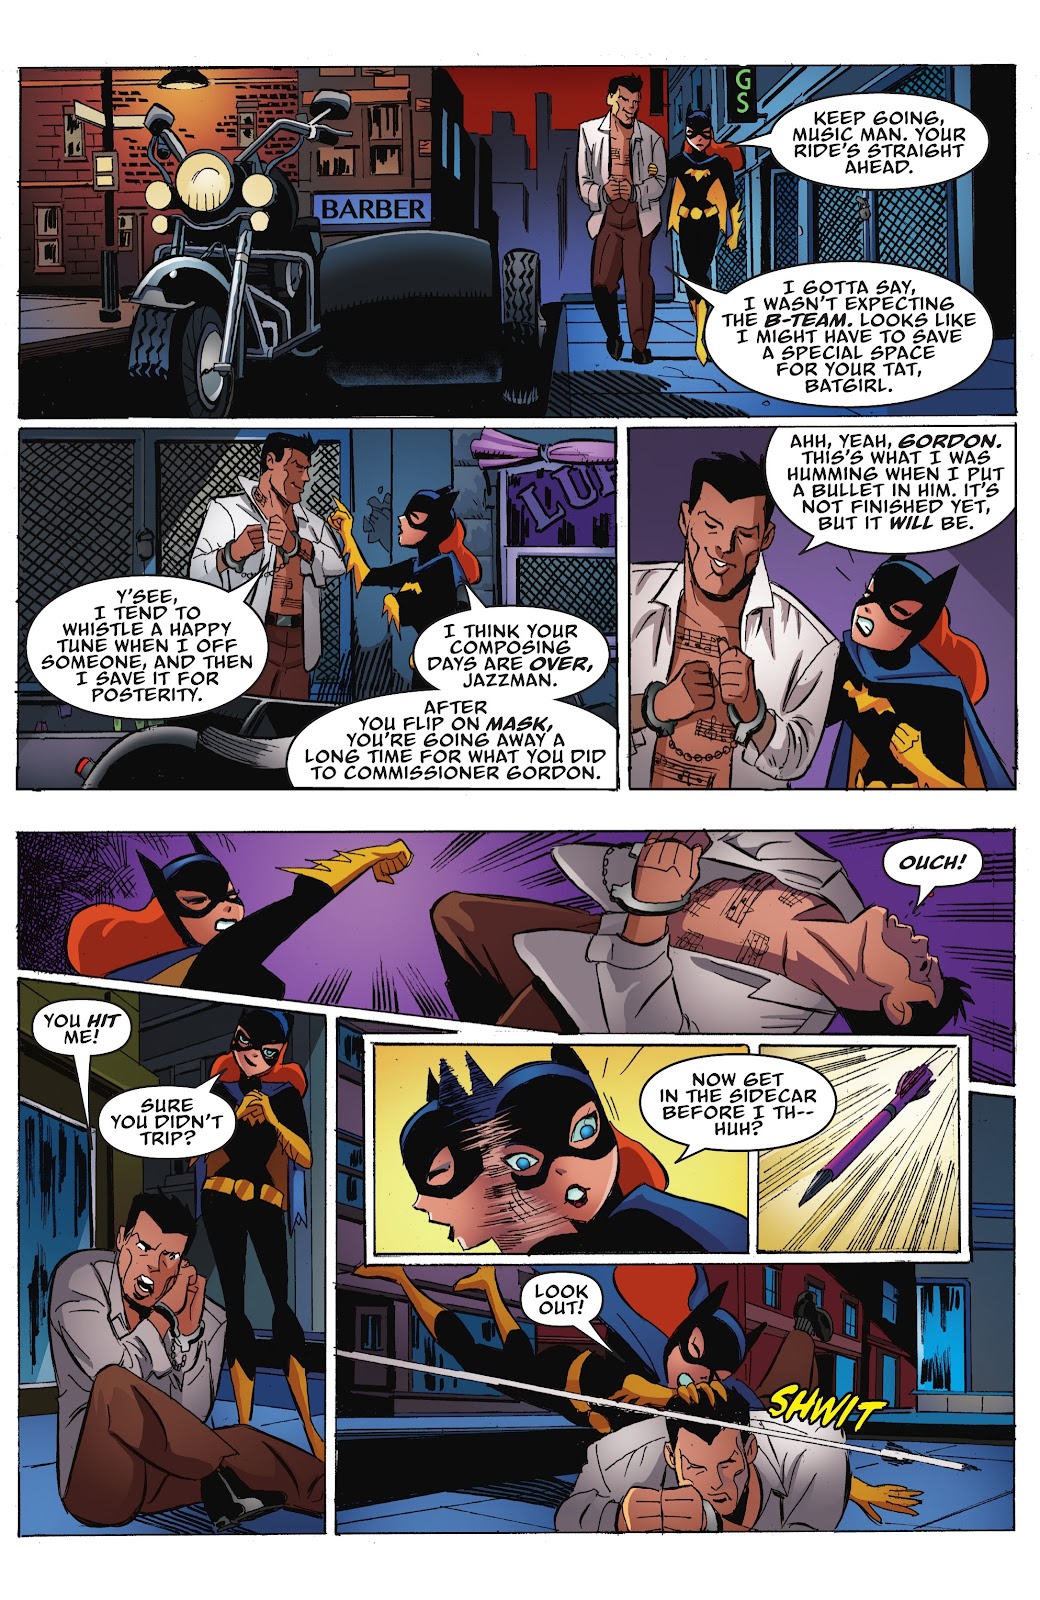 Batman: The Adventures Continue: Season Two issue 3 - Page 9